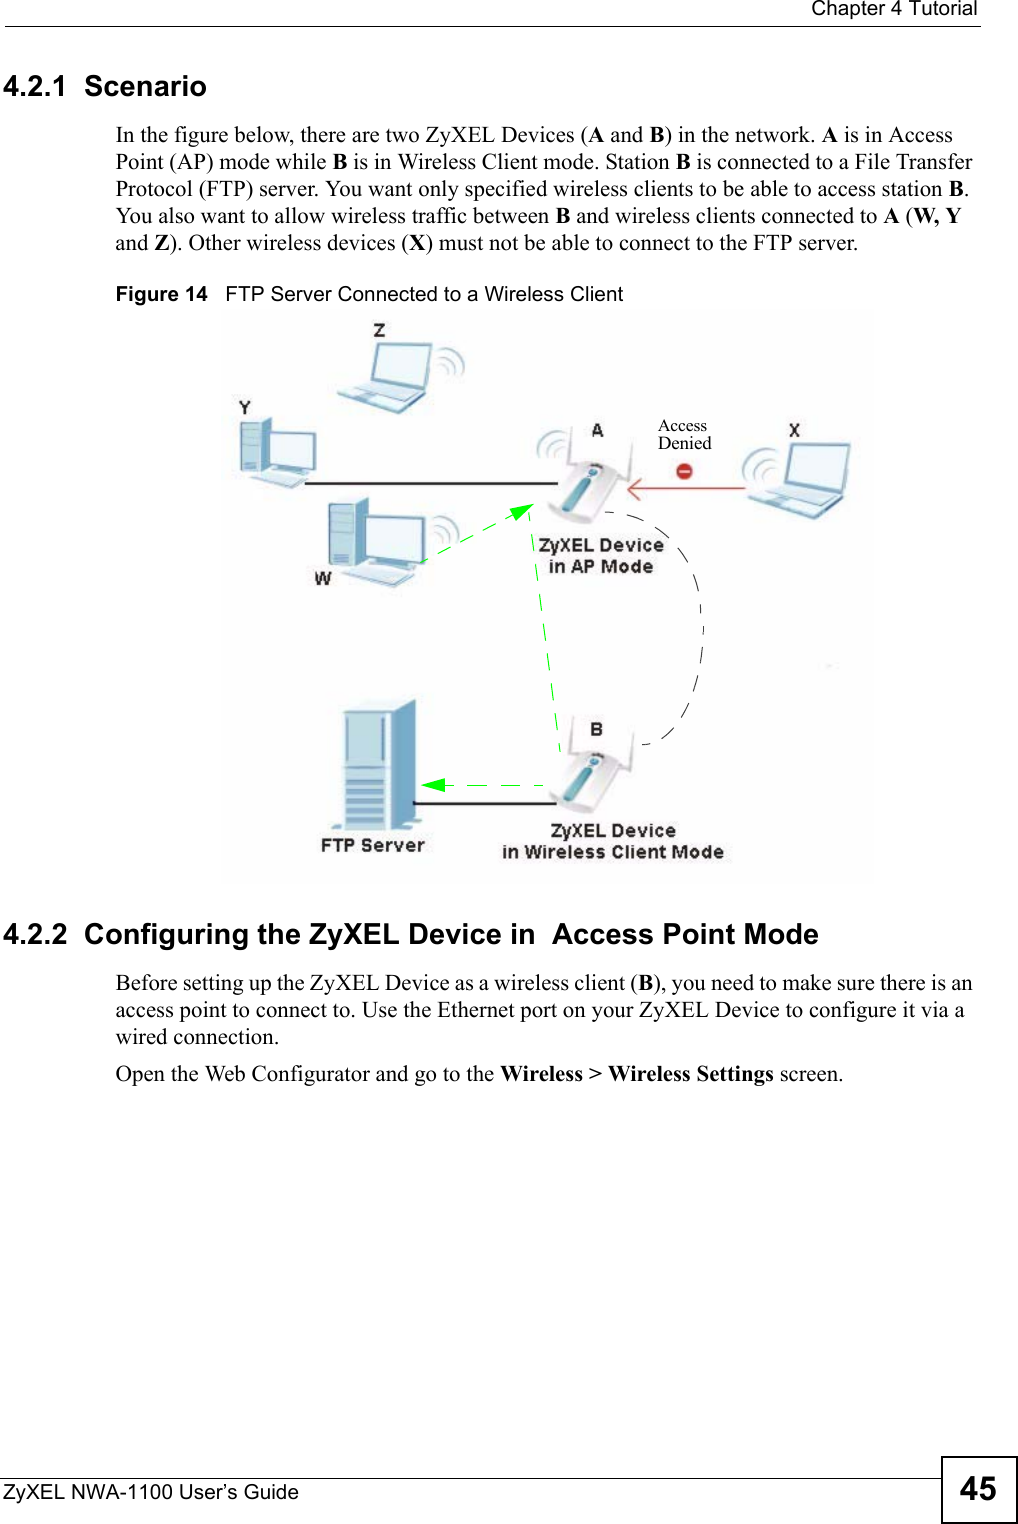  Chapter 4 TutorialZyXEL NWA-1100 User’s Guide 454.2.1  ScenarioIn the figure below, there are two ZyXEL Devices (A and B) in the network. A is in Access Point (AP) mode while B is in Wireless Client mode. Station B is connected to a File Transfer Protocol (FTP) server. You want only specified wireless clients to be able to access station B. You also want to allow wireless traffic between B and wireless clients connected to A (W, Y and Z). Other wireless devices (X) must not be able to connect to the FTP server. Figure 14   FTP Server Connected to a Wireless Client4.2.2  Configuring the ZyXEL Device in  Access Point ModeBefore setting up the ZyXEL Device as a wireless client (B), you need to make sure there is an access point to connect to. Use the Ethernet port on your ZyXEL Device to configure it via a wired connection. Open the Web Configurator and go to the Wireless &gt; Wireless Settings screen.DeniedAccess